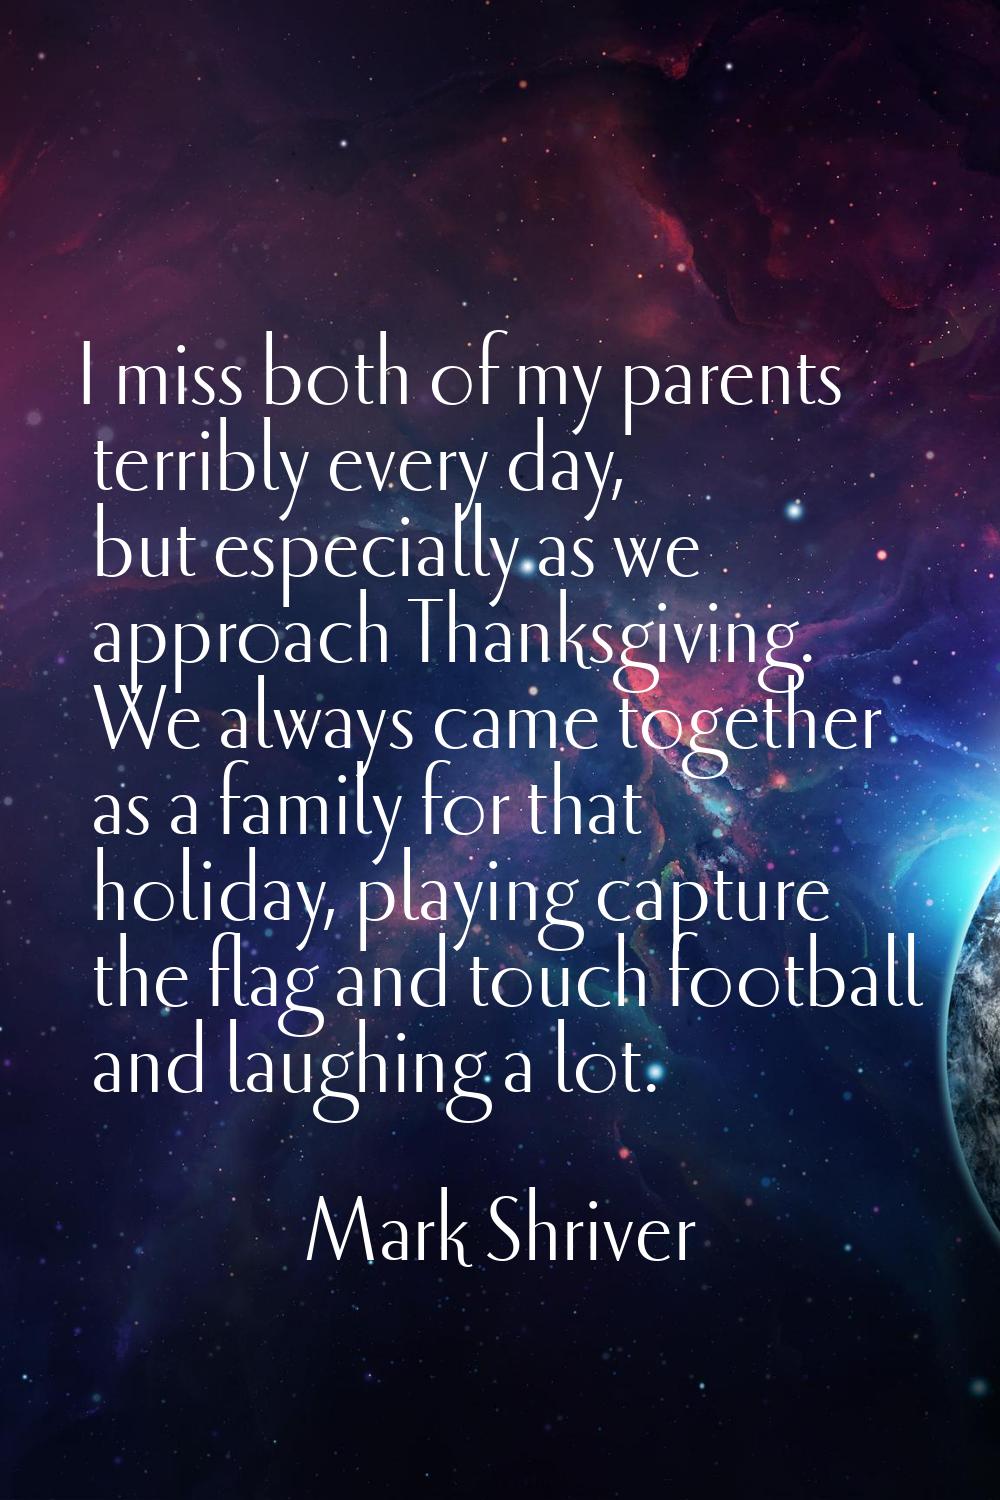 I miss both of my parents terribly every day, but especially as we approach Thanksgiving. We always